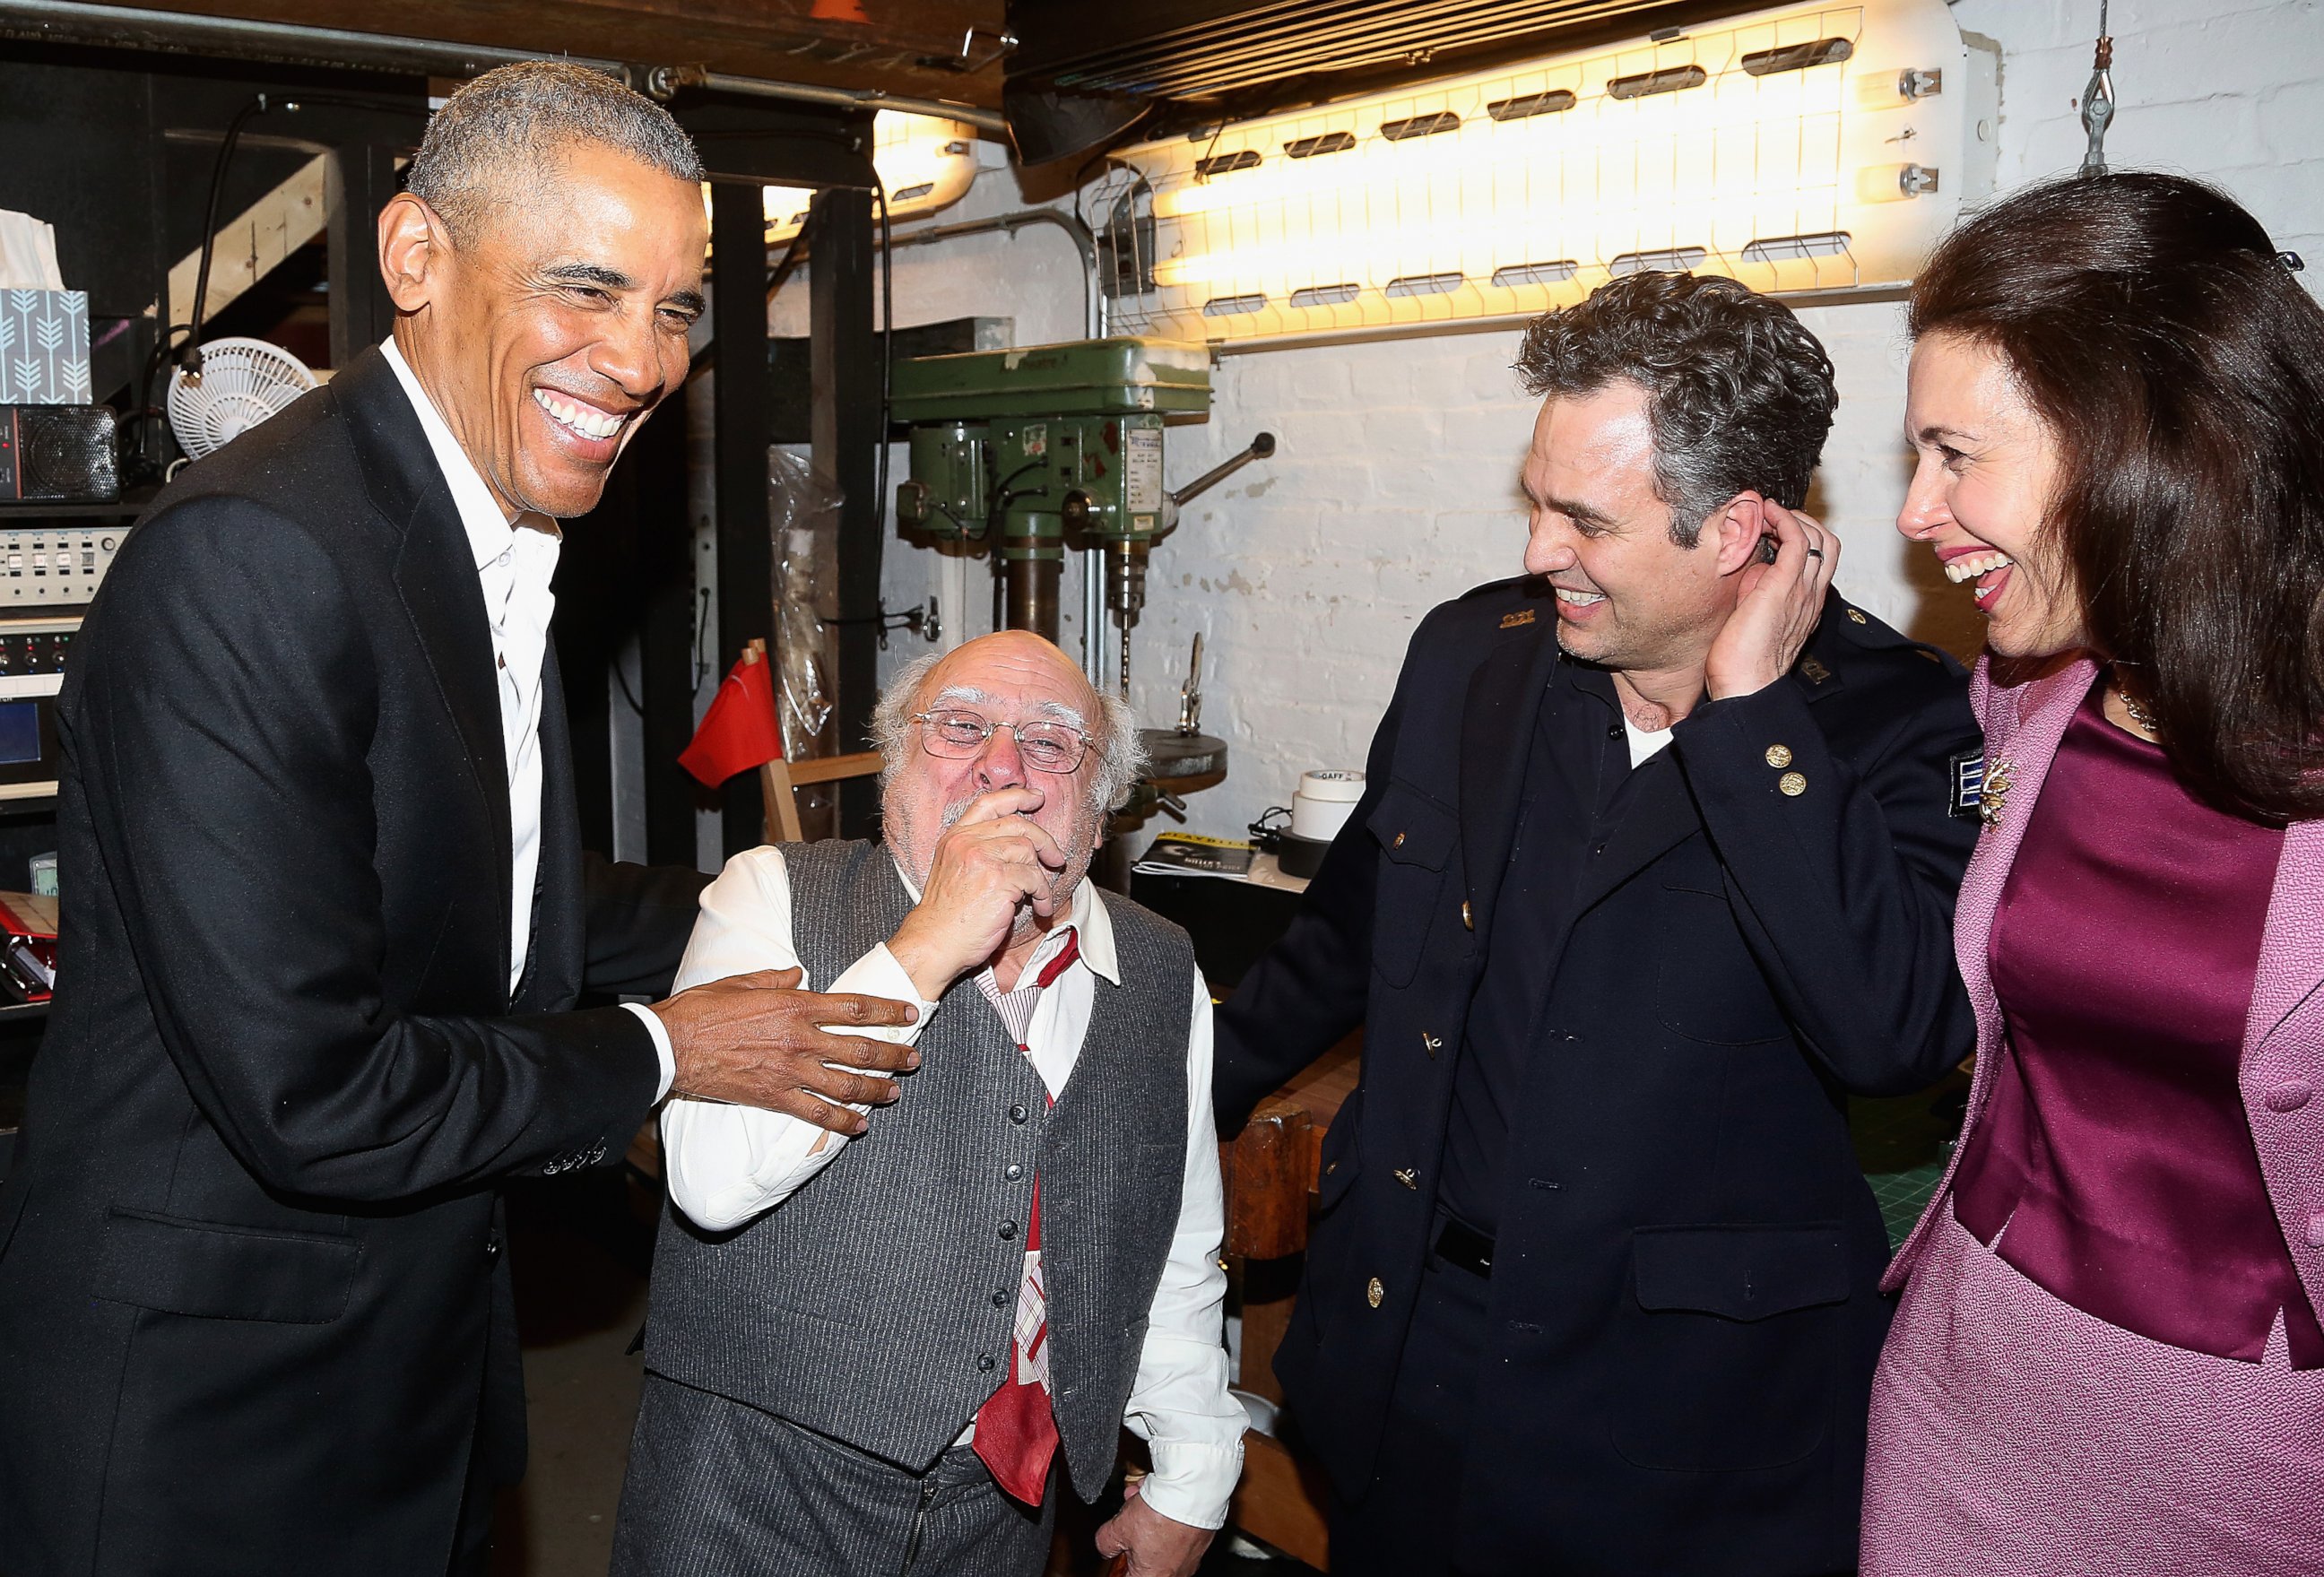 PHOTO: Barack Obama, Danny DeVito, Mark Ruffalo and Jessica Hecht chat backstage at The Roundabout Theatre Company's production of "Arthur Miller's The Price" on Broadway at The American Airlines Theatre on February 24, 2017 in New York City. 